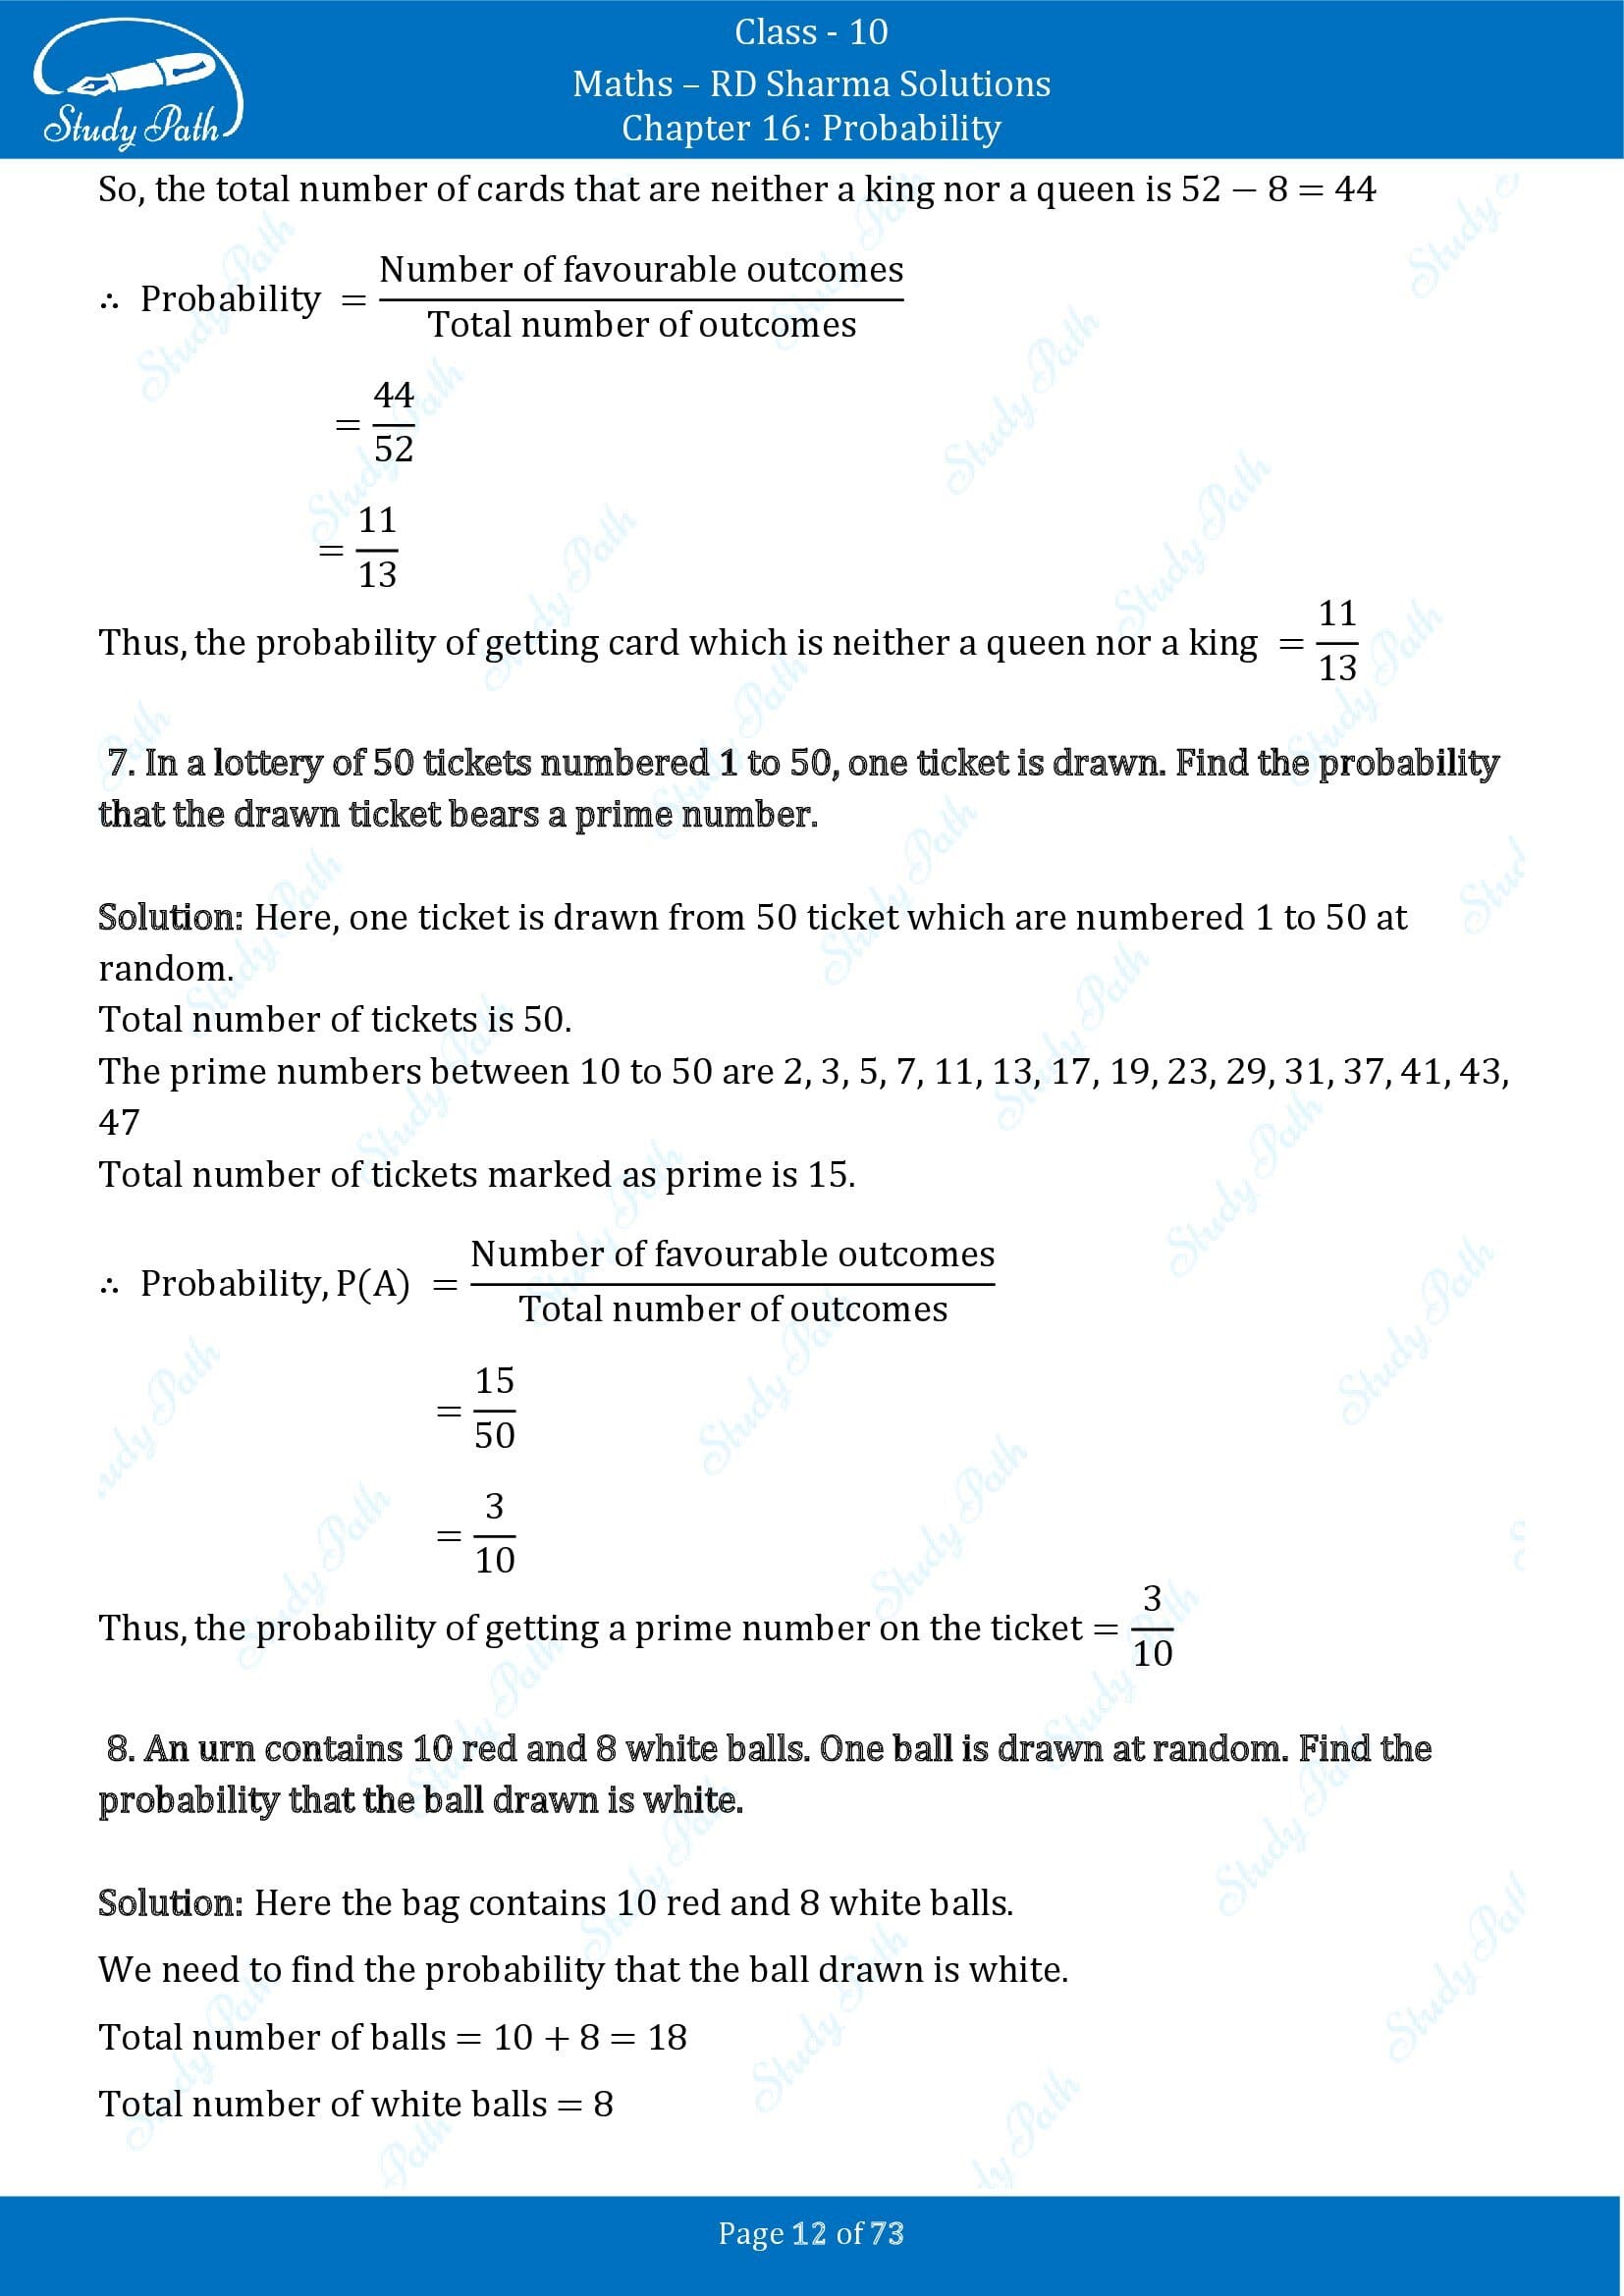 RD Sharma Solutions Class 10 Chapter 16 Probability Exercise 16.1 00012